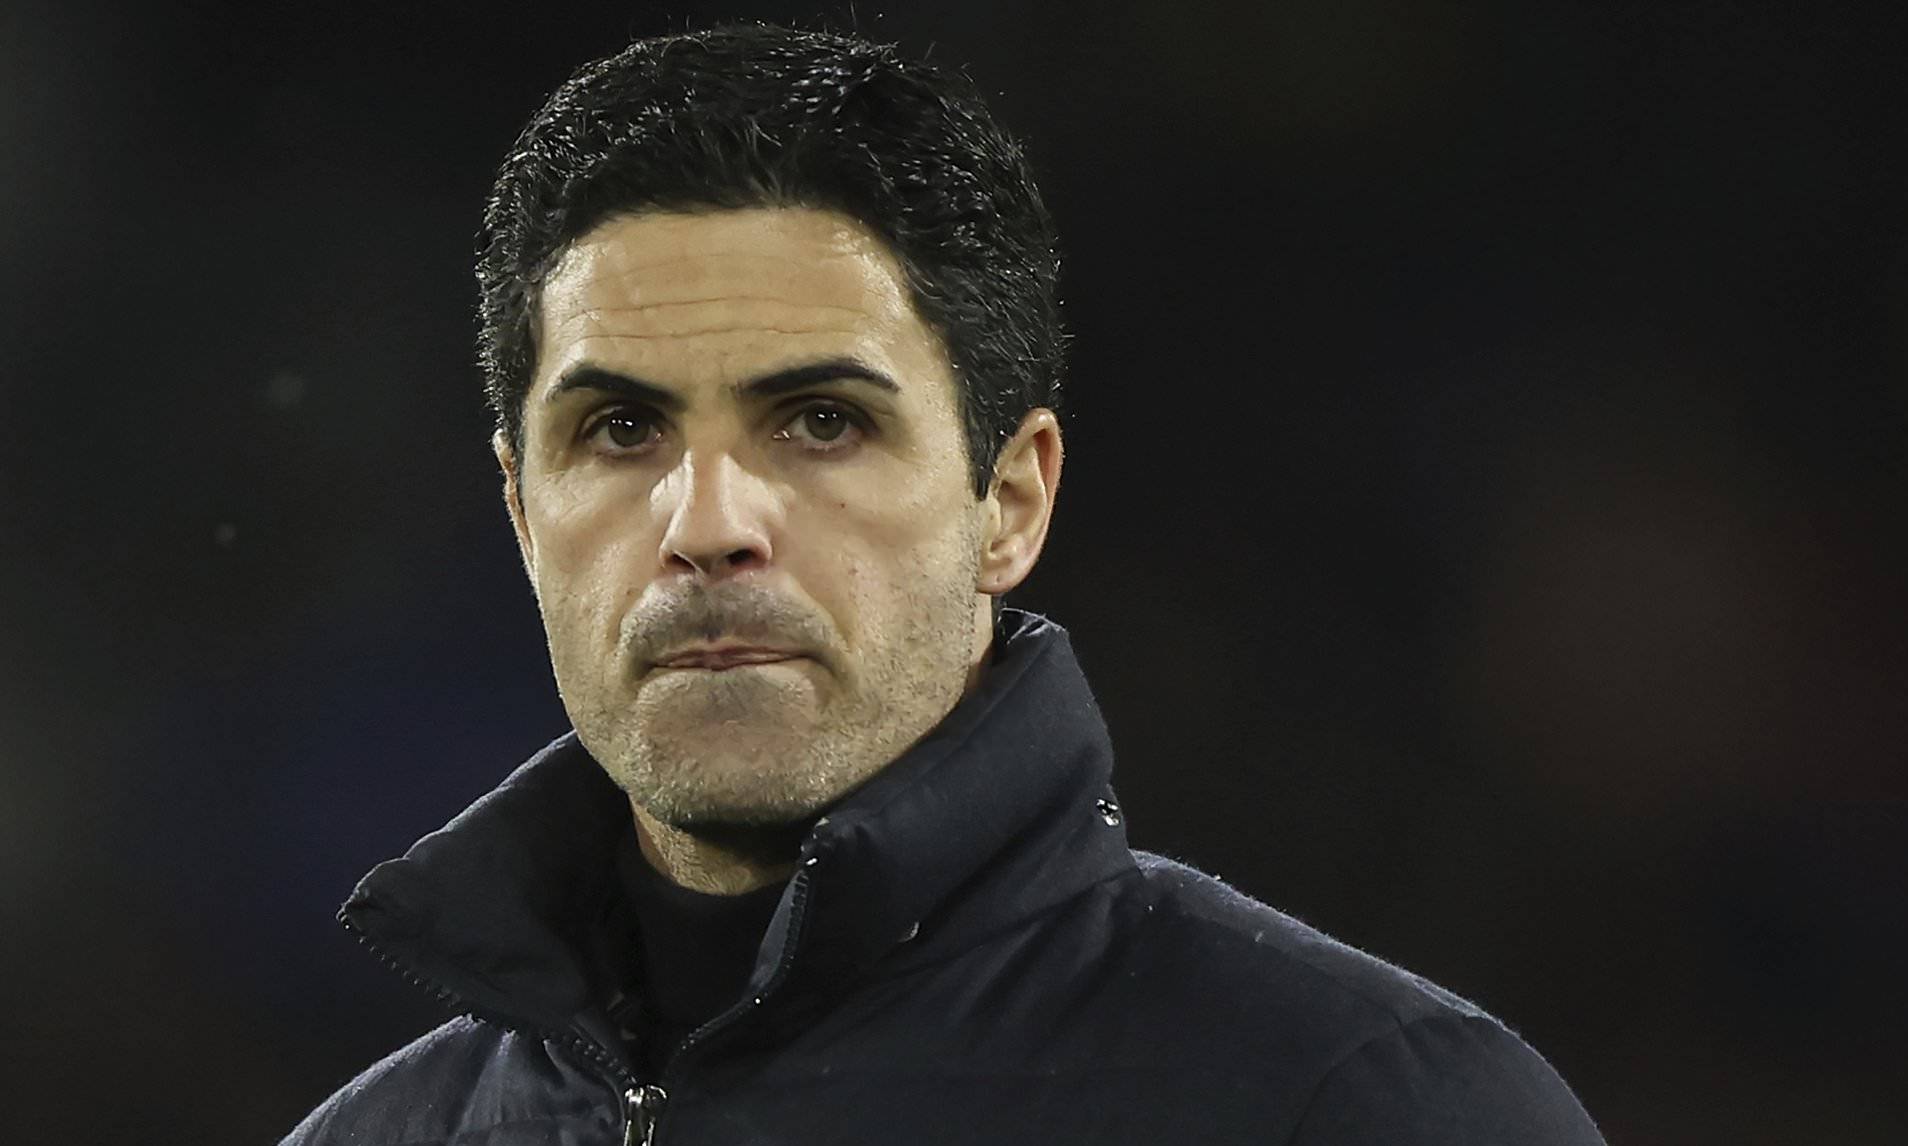 Arsenal boss Mikel Arteta says sorry to fans after 3-0 defeat at Palace